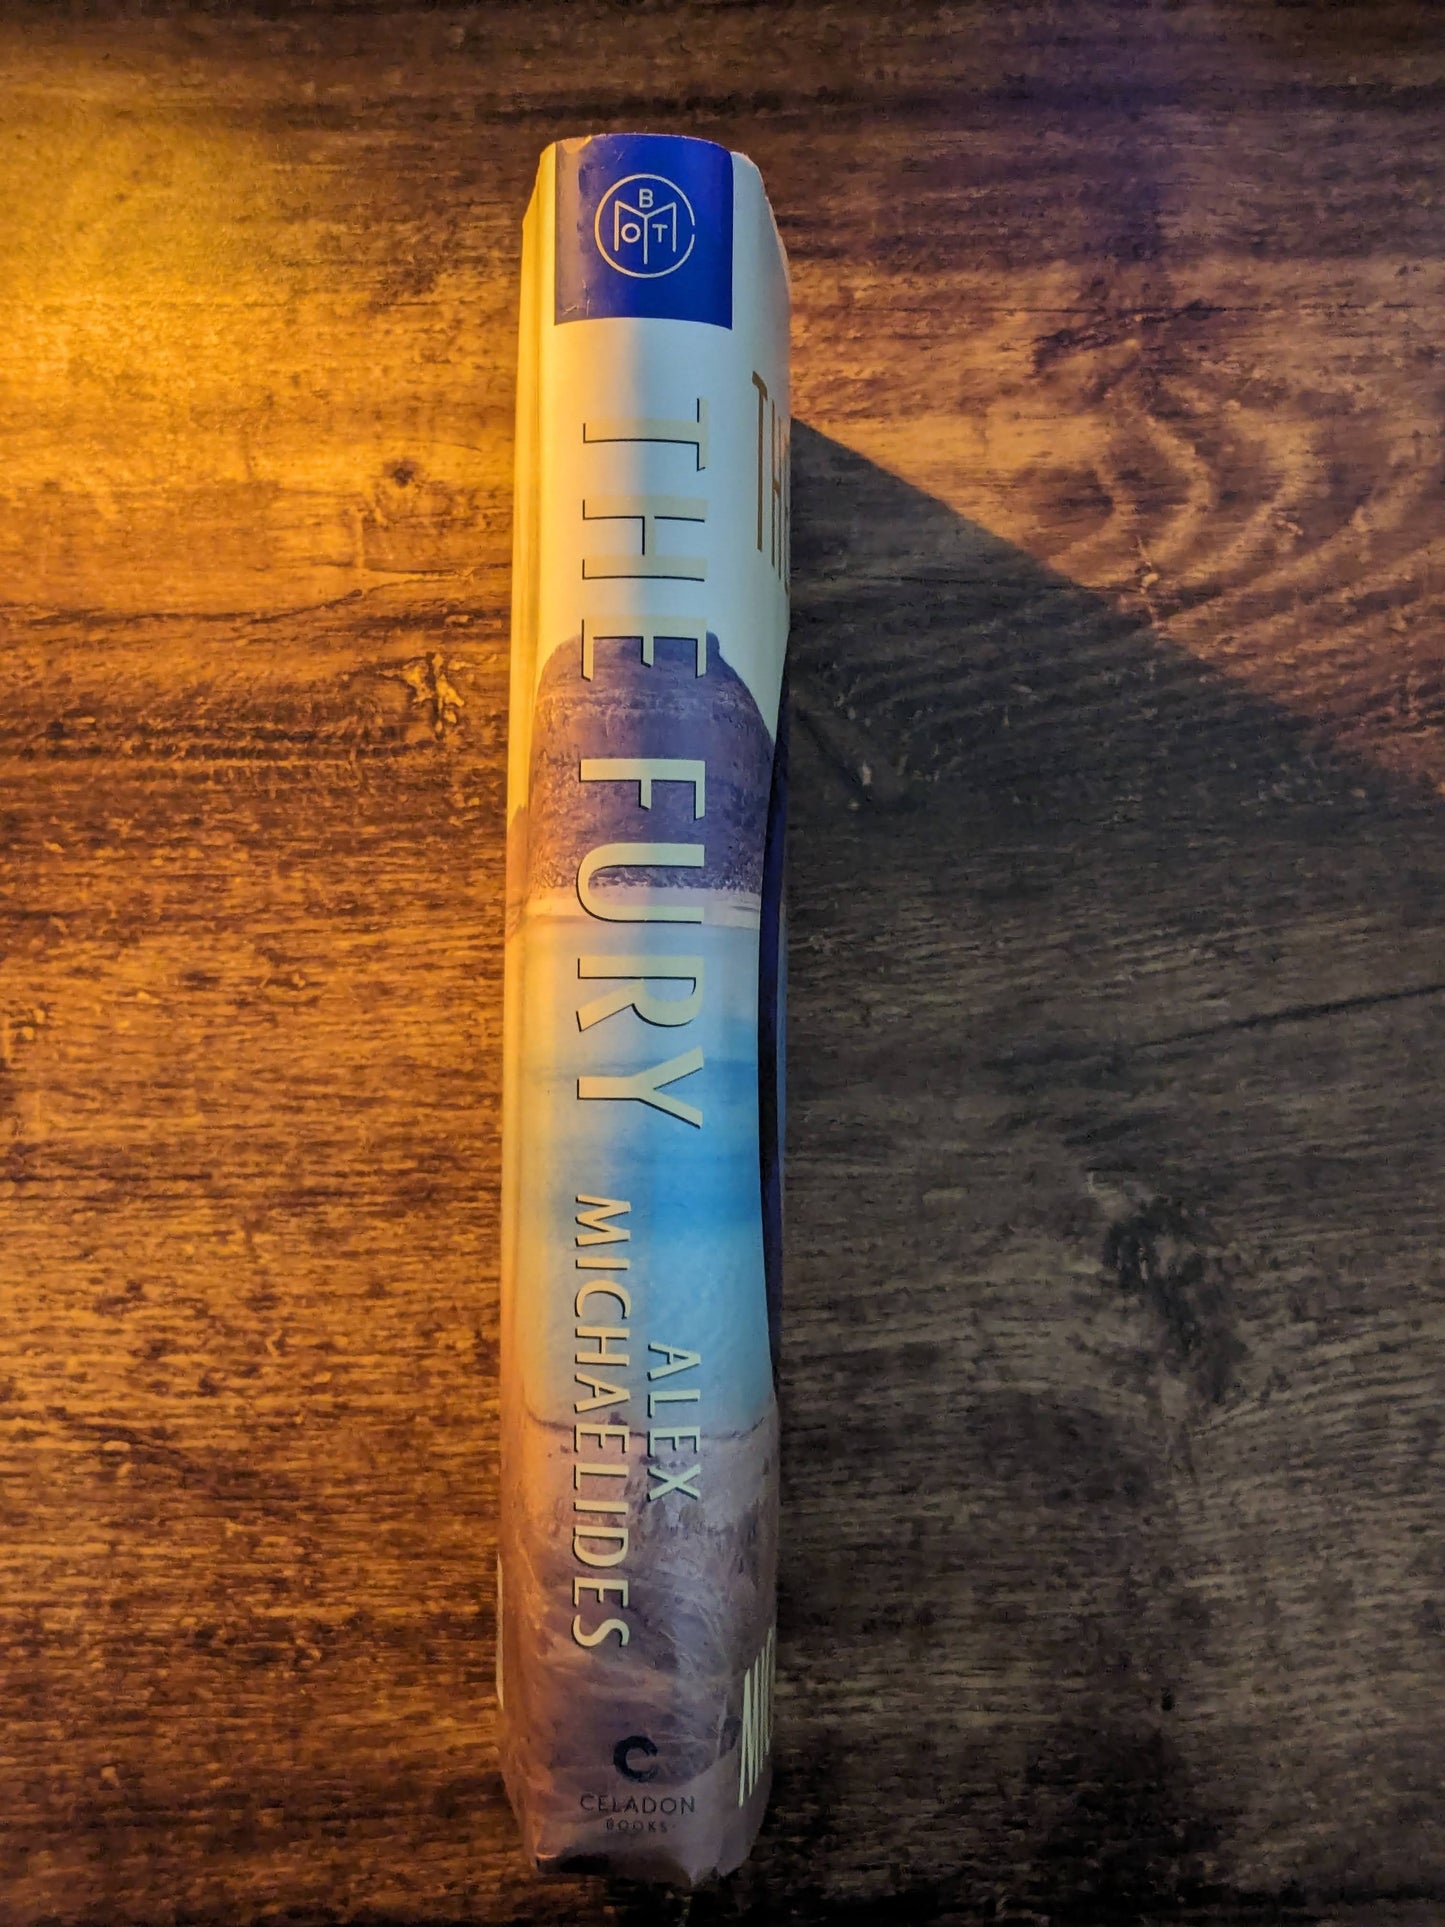 Fury, The (First Edition Hardcover) by Alex Michaelides